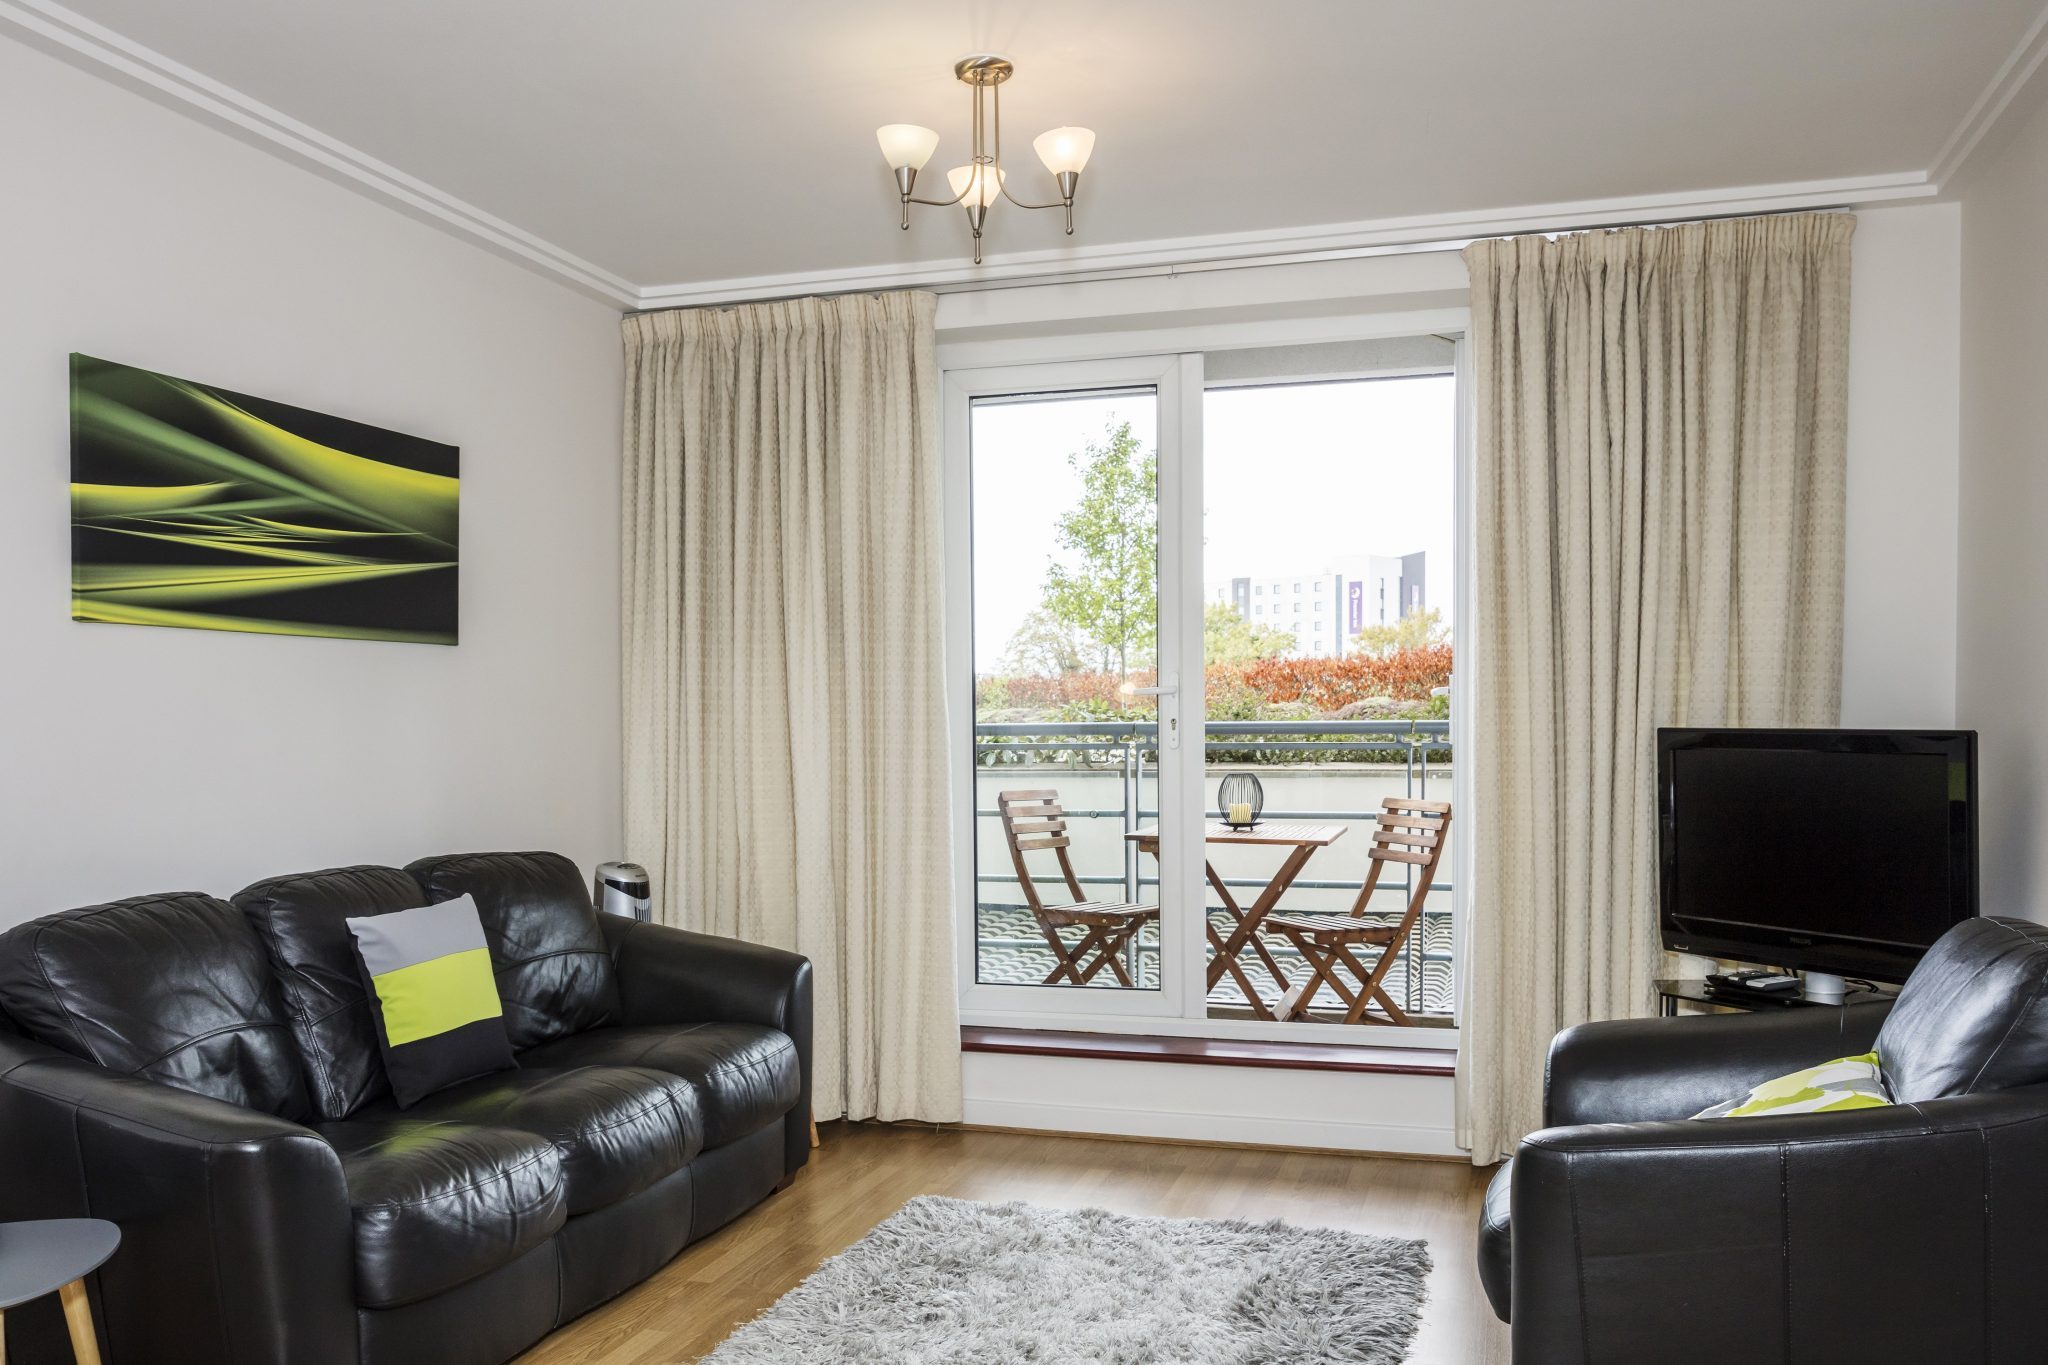 Looking for affordable accommodation in Woking? why not book our lovely Centrium apartments at Woking Short Stay Apartments. Call today for great rates.